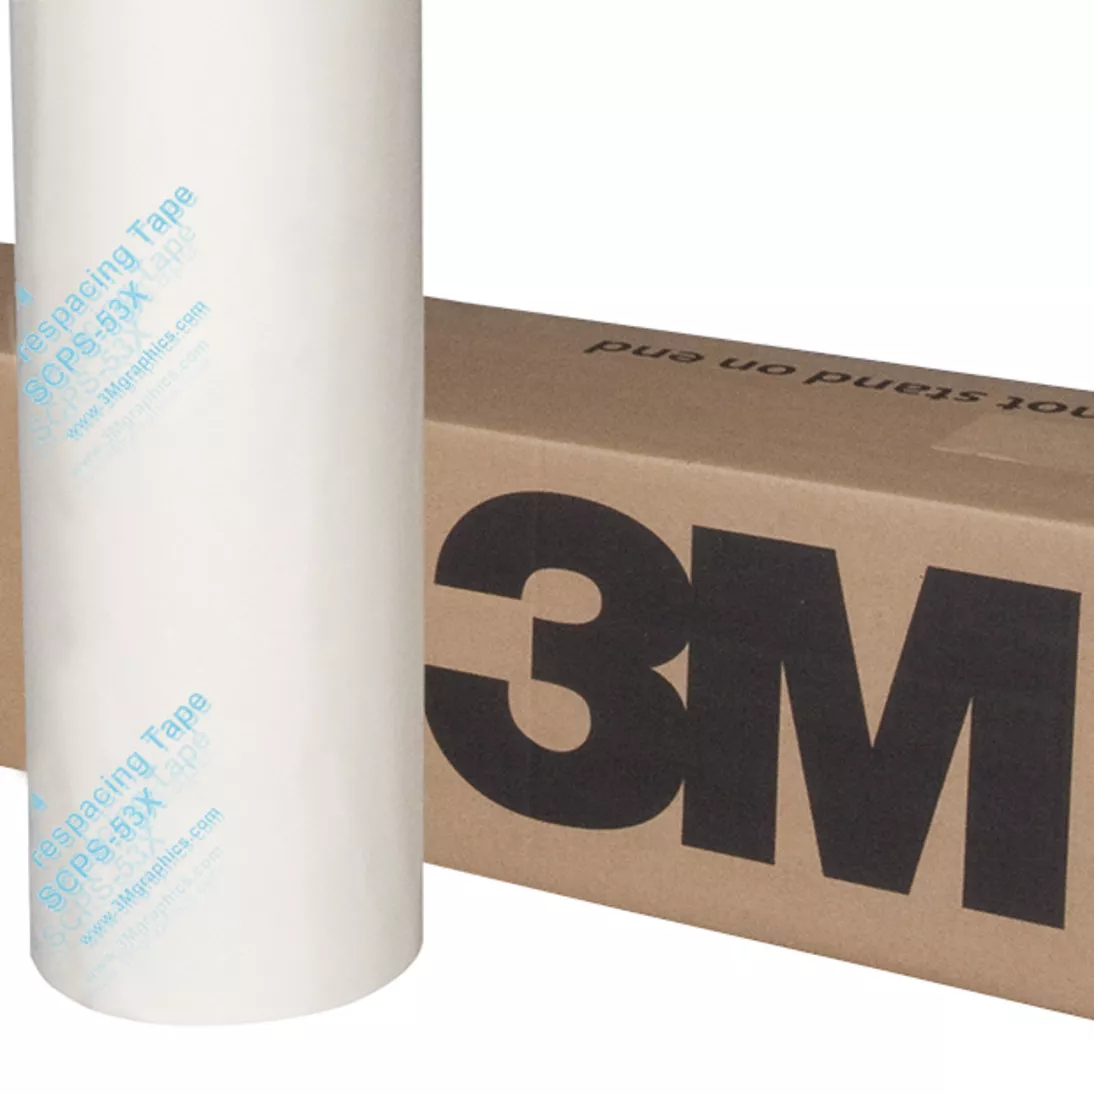 3M™ Prespacing Tape SCPS-53X, 24 in x 100 yd, 1 Roll/Case